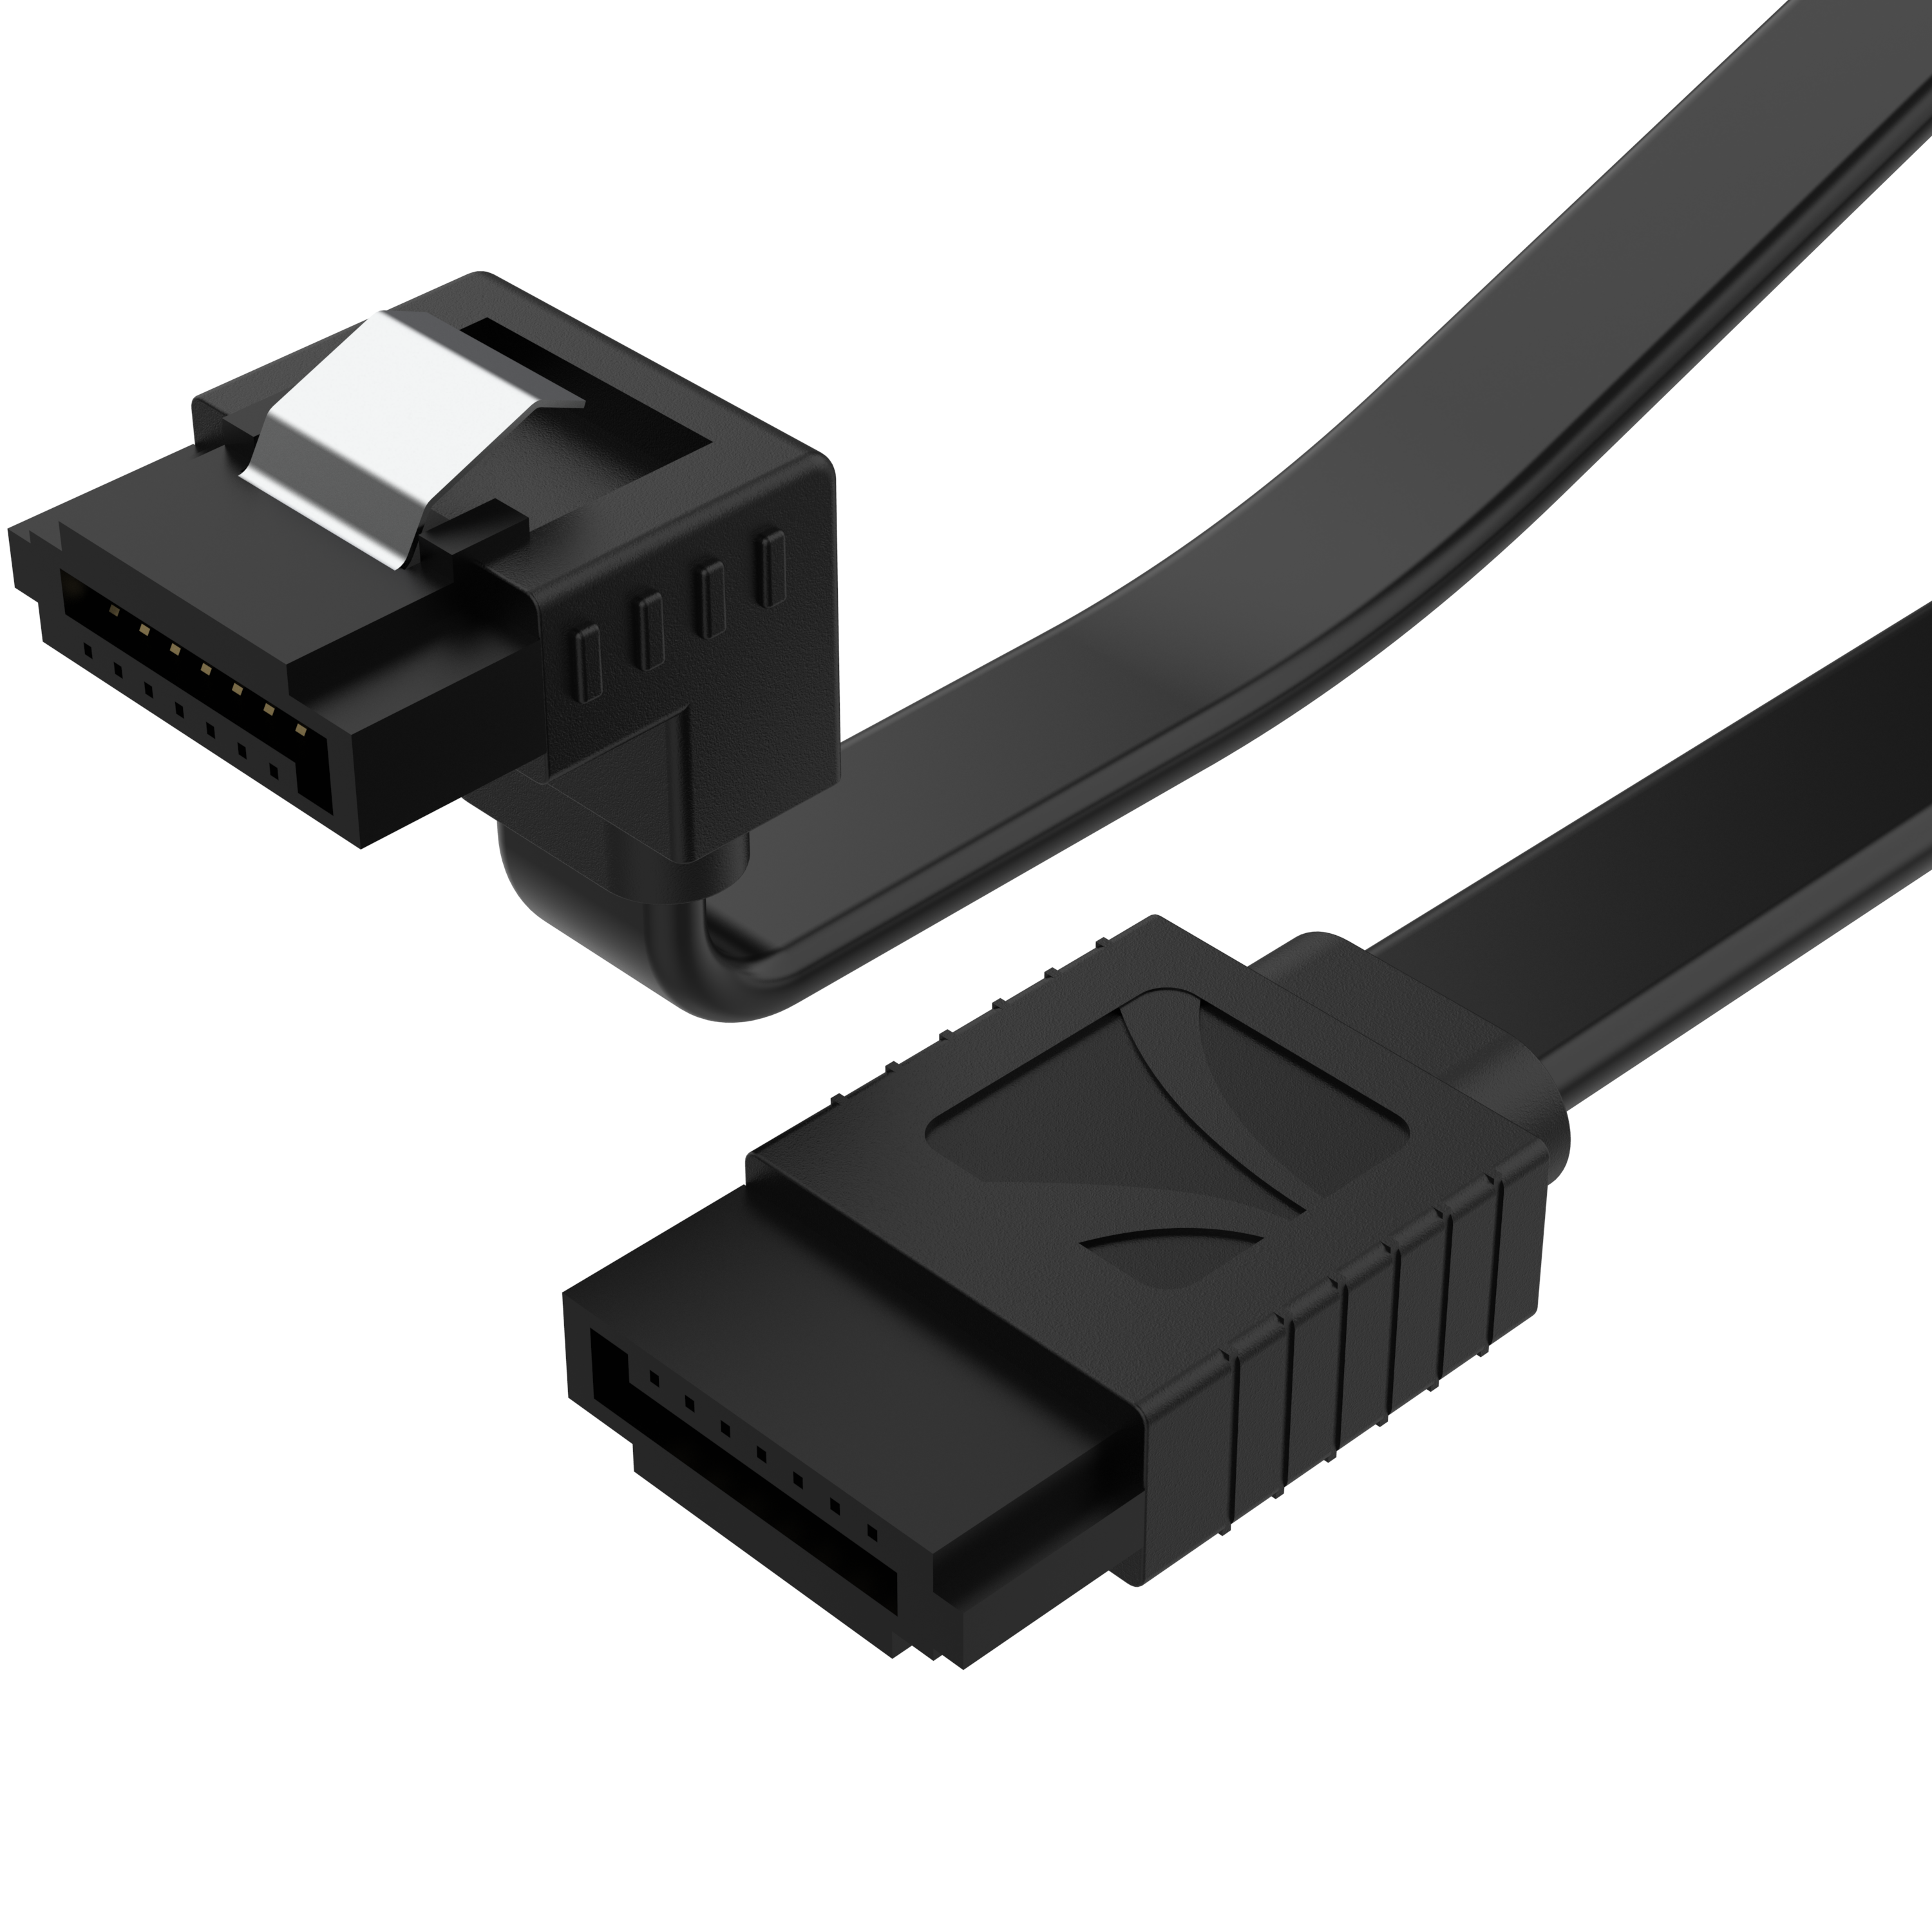 III Gbit/s) Right Angle Data Cable with Locking Latch for HDD